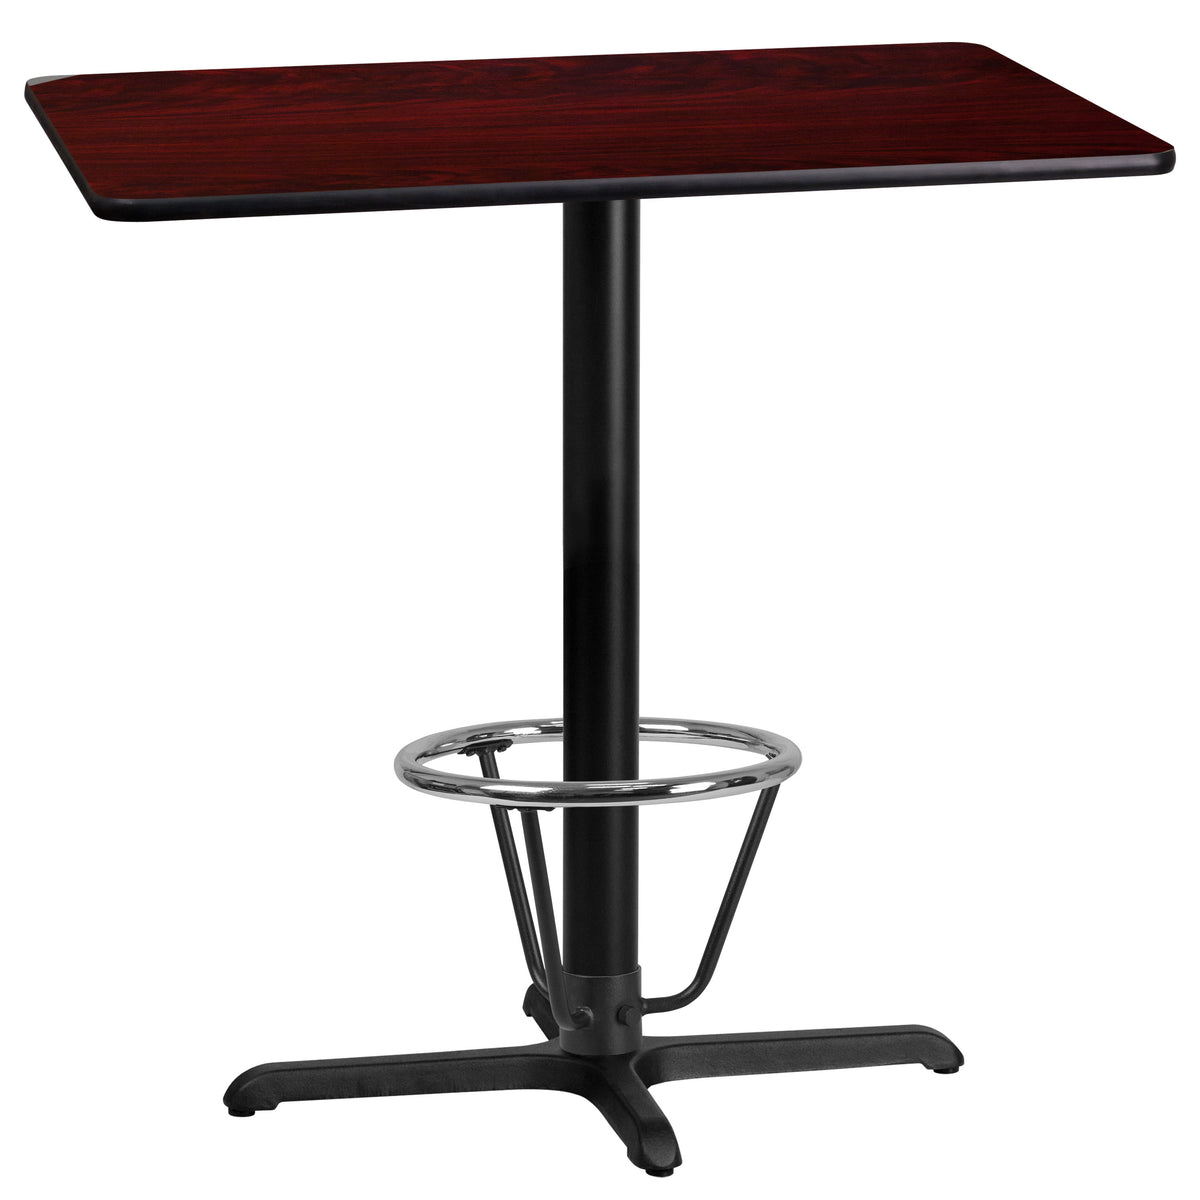 Mahogany |#| 24inch x 42inch Laminate Table Top & 23.5inch x 29.5inch Bar Height Base with Foot Ring